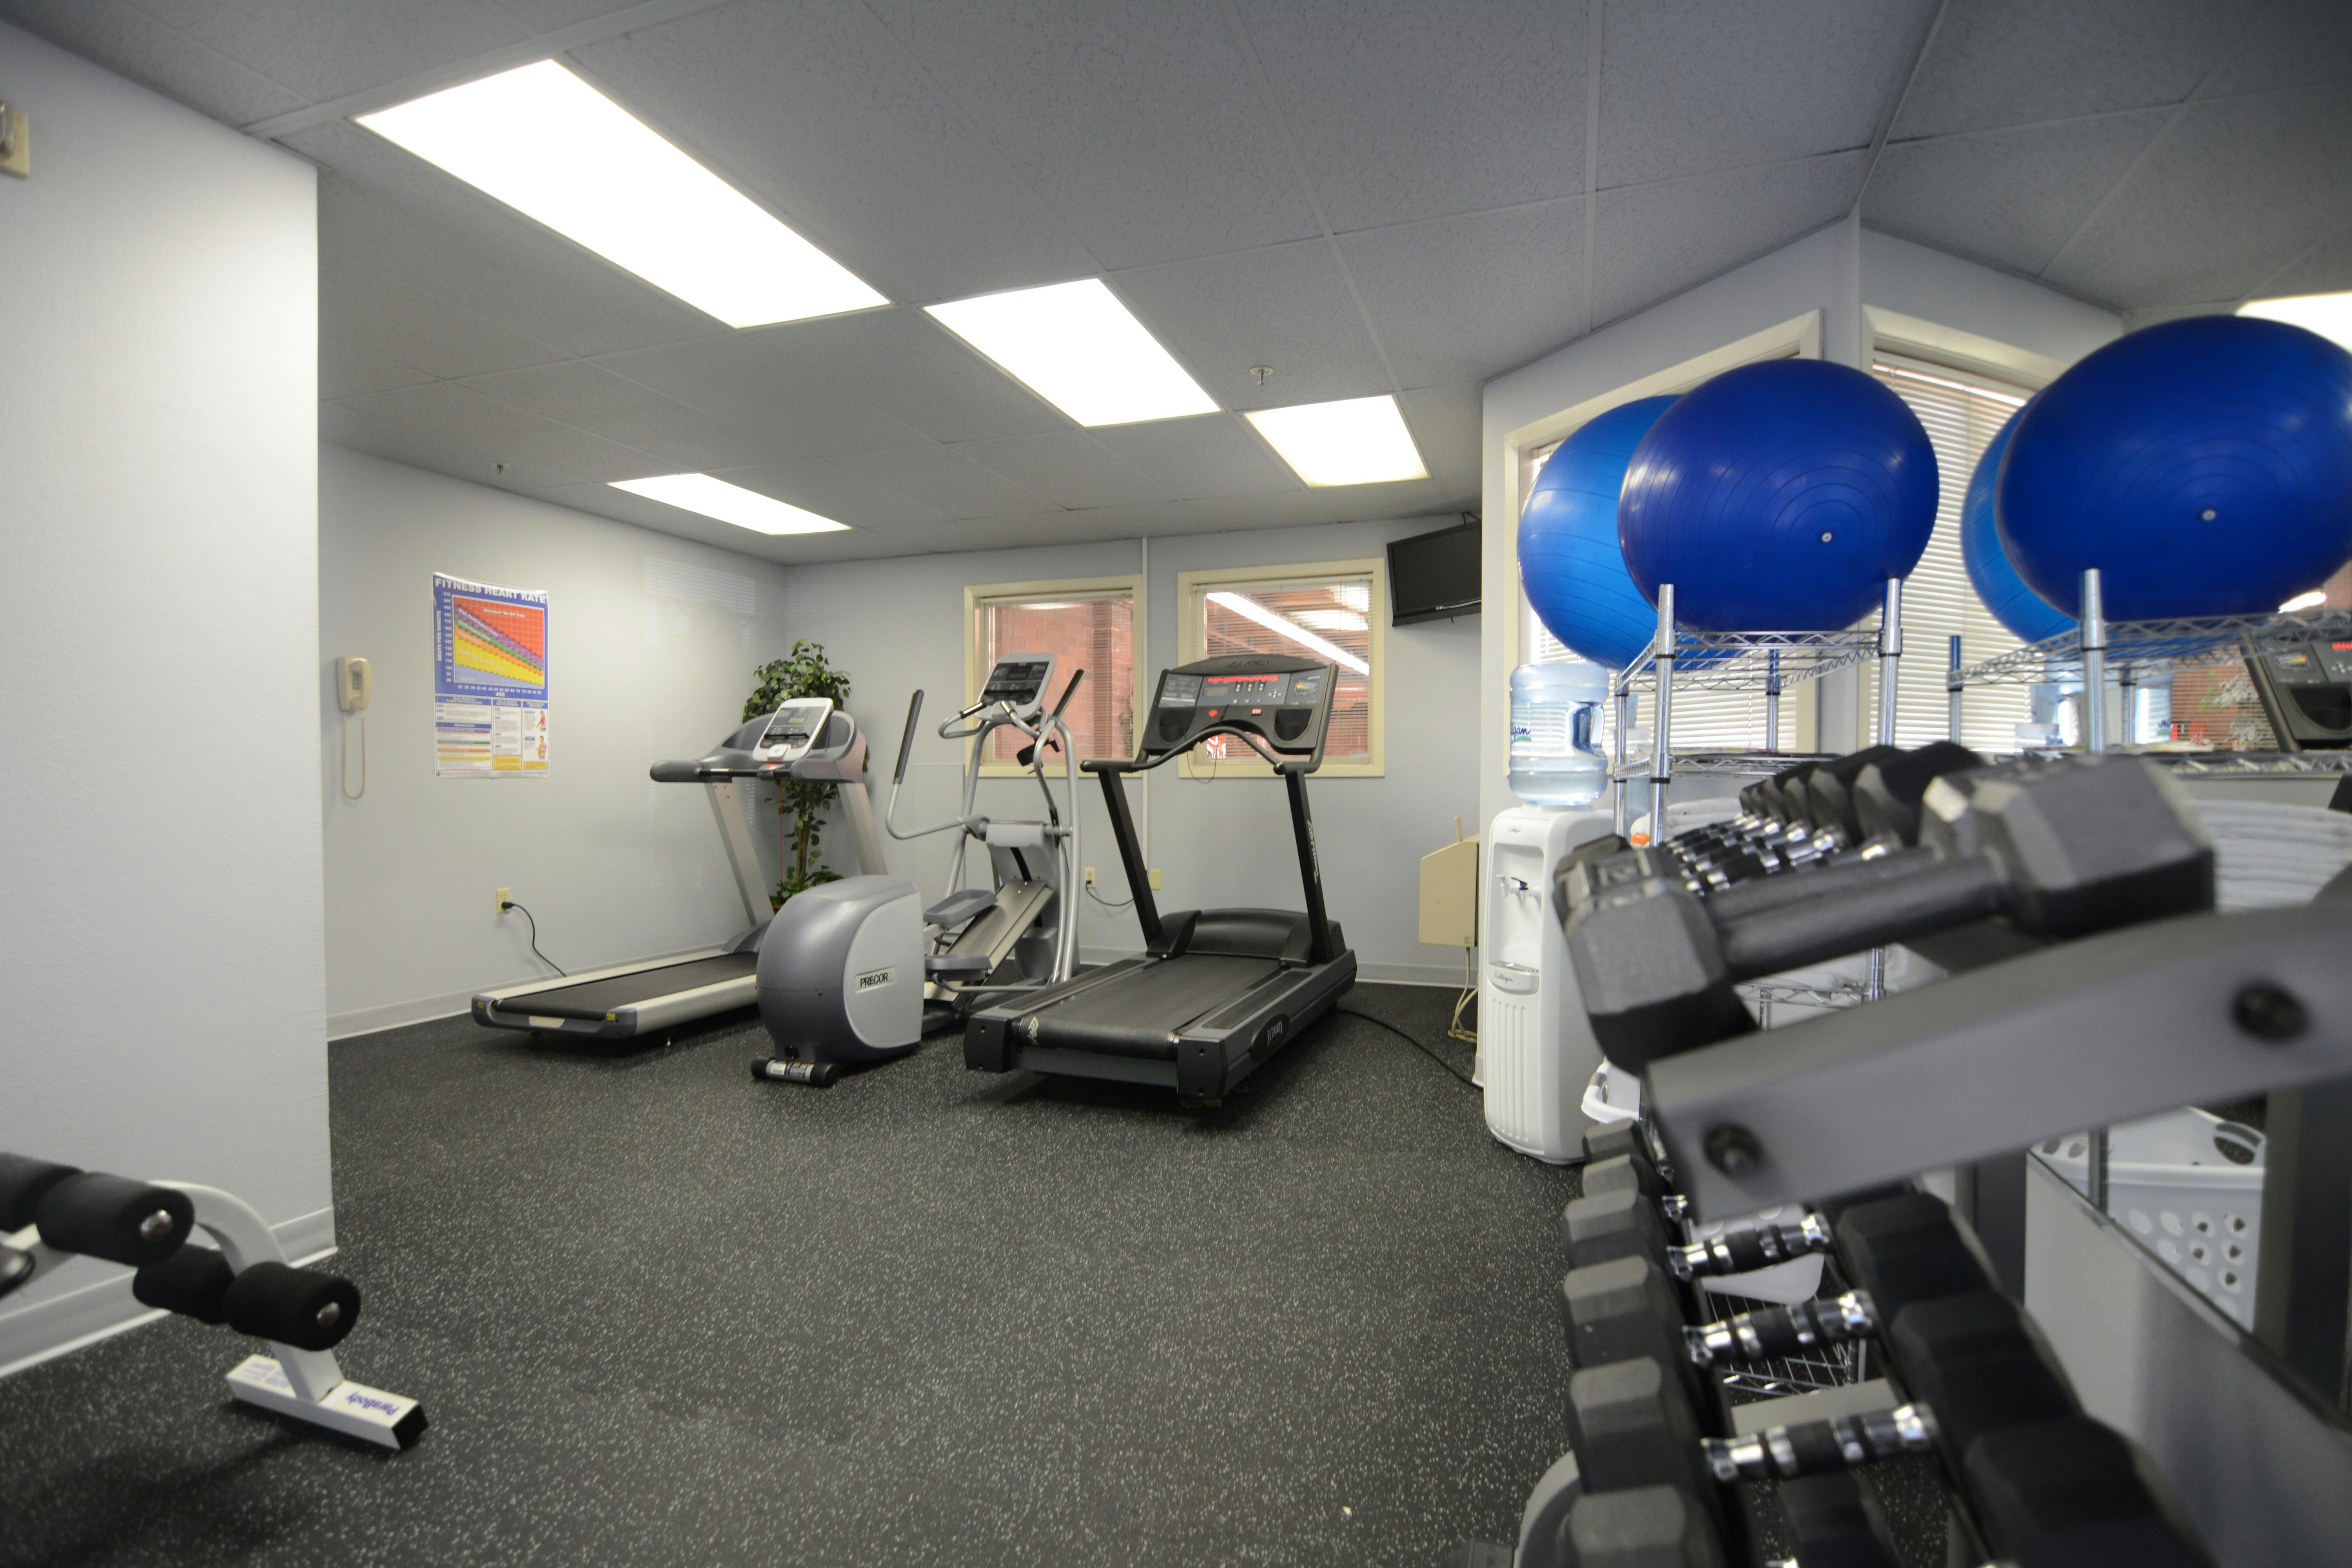 Exercise room, weights, machines